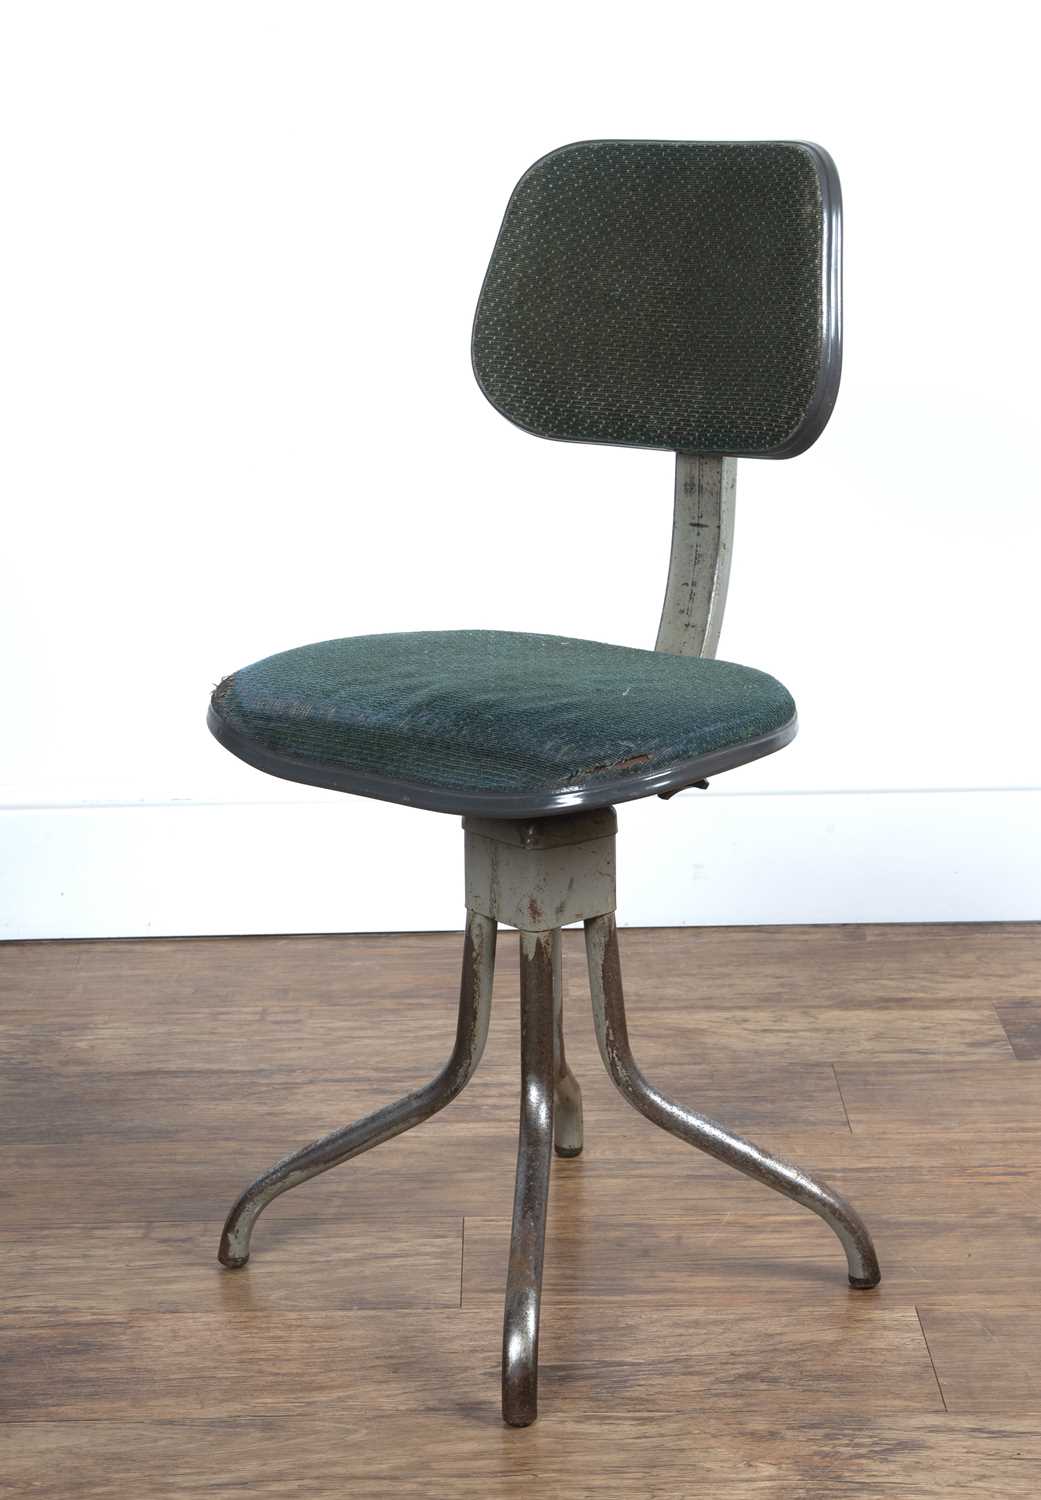 Evertaut industrial factory stool or chair, marked 'Pat no 972.460' 'Pat nos 752215, 839143' - Image 3 of 4